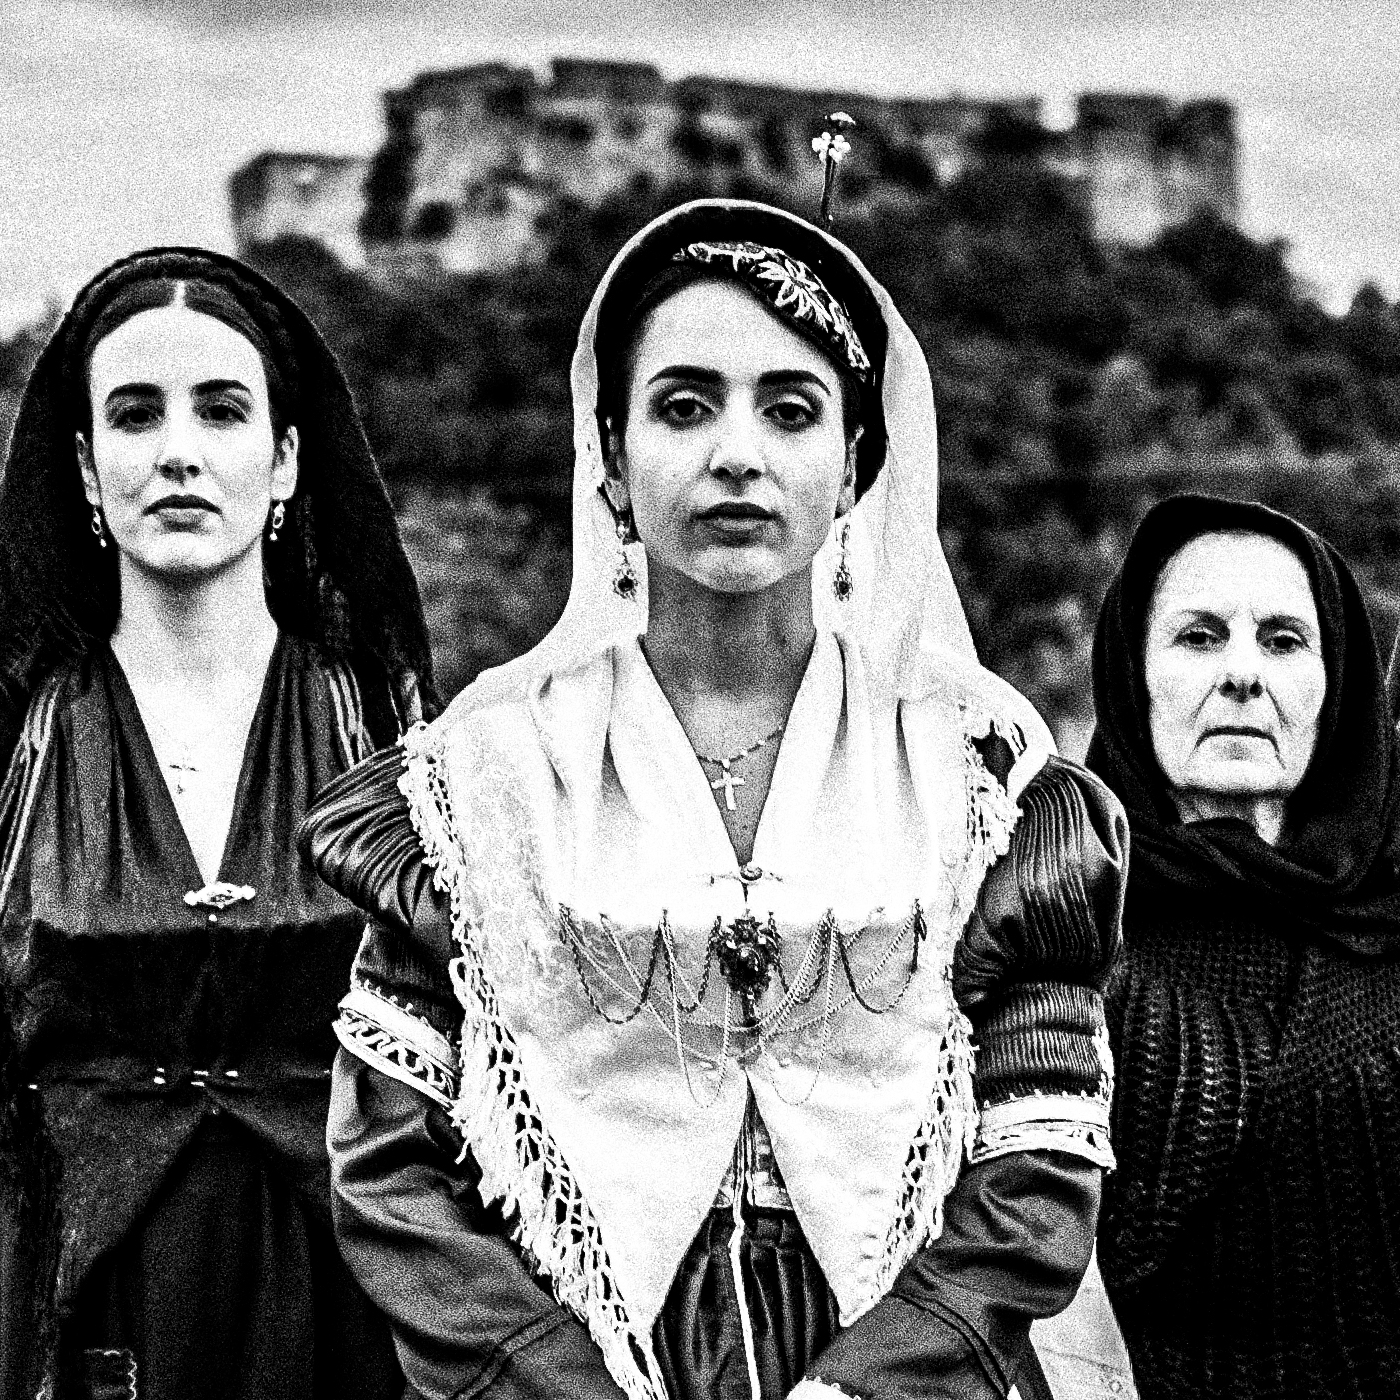 Black and White Photography Wall Art Greece | Costumes of Lefkada island at a castle multiple generations Ionian Sea by George Tatakis - detailed view